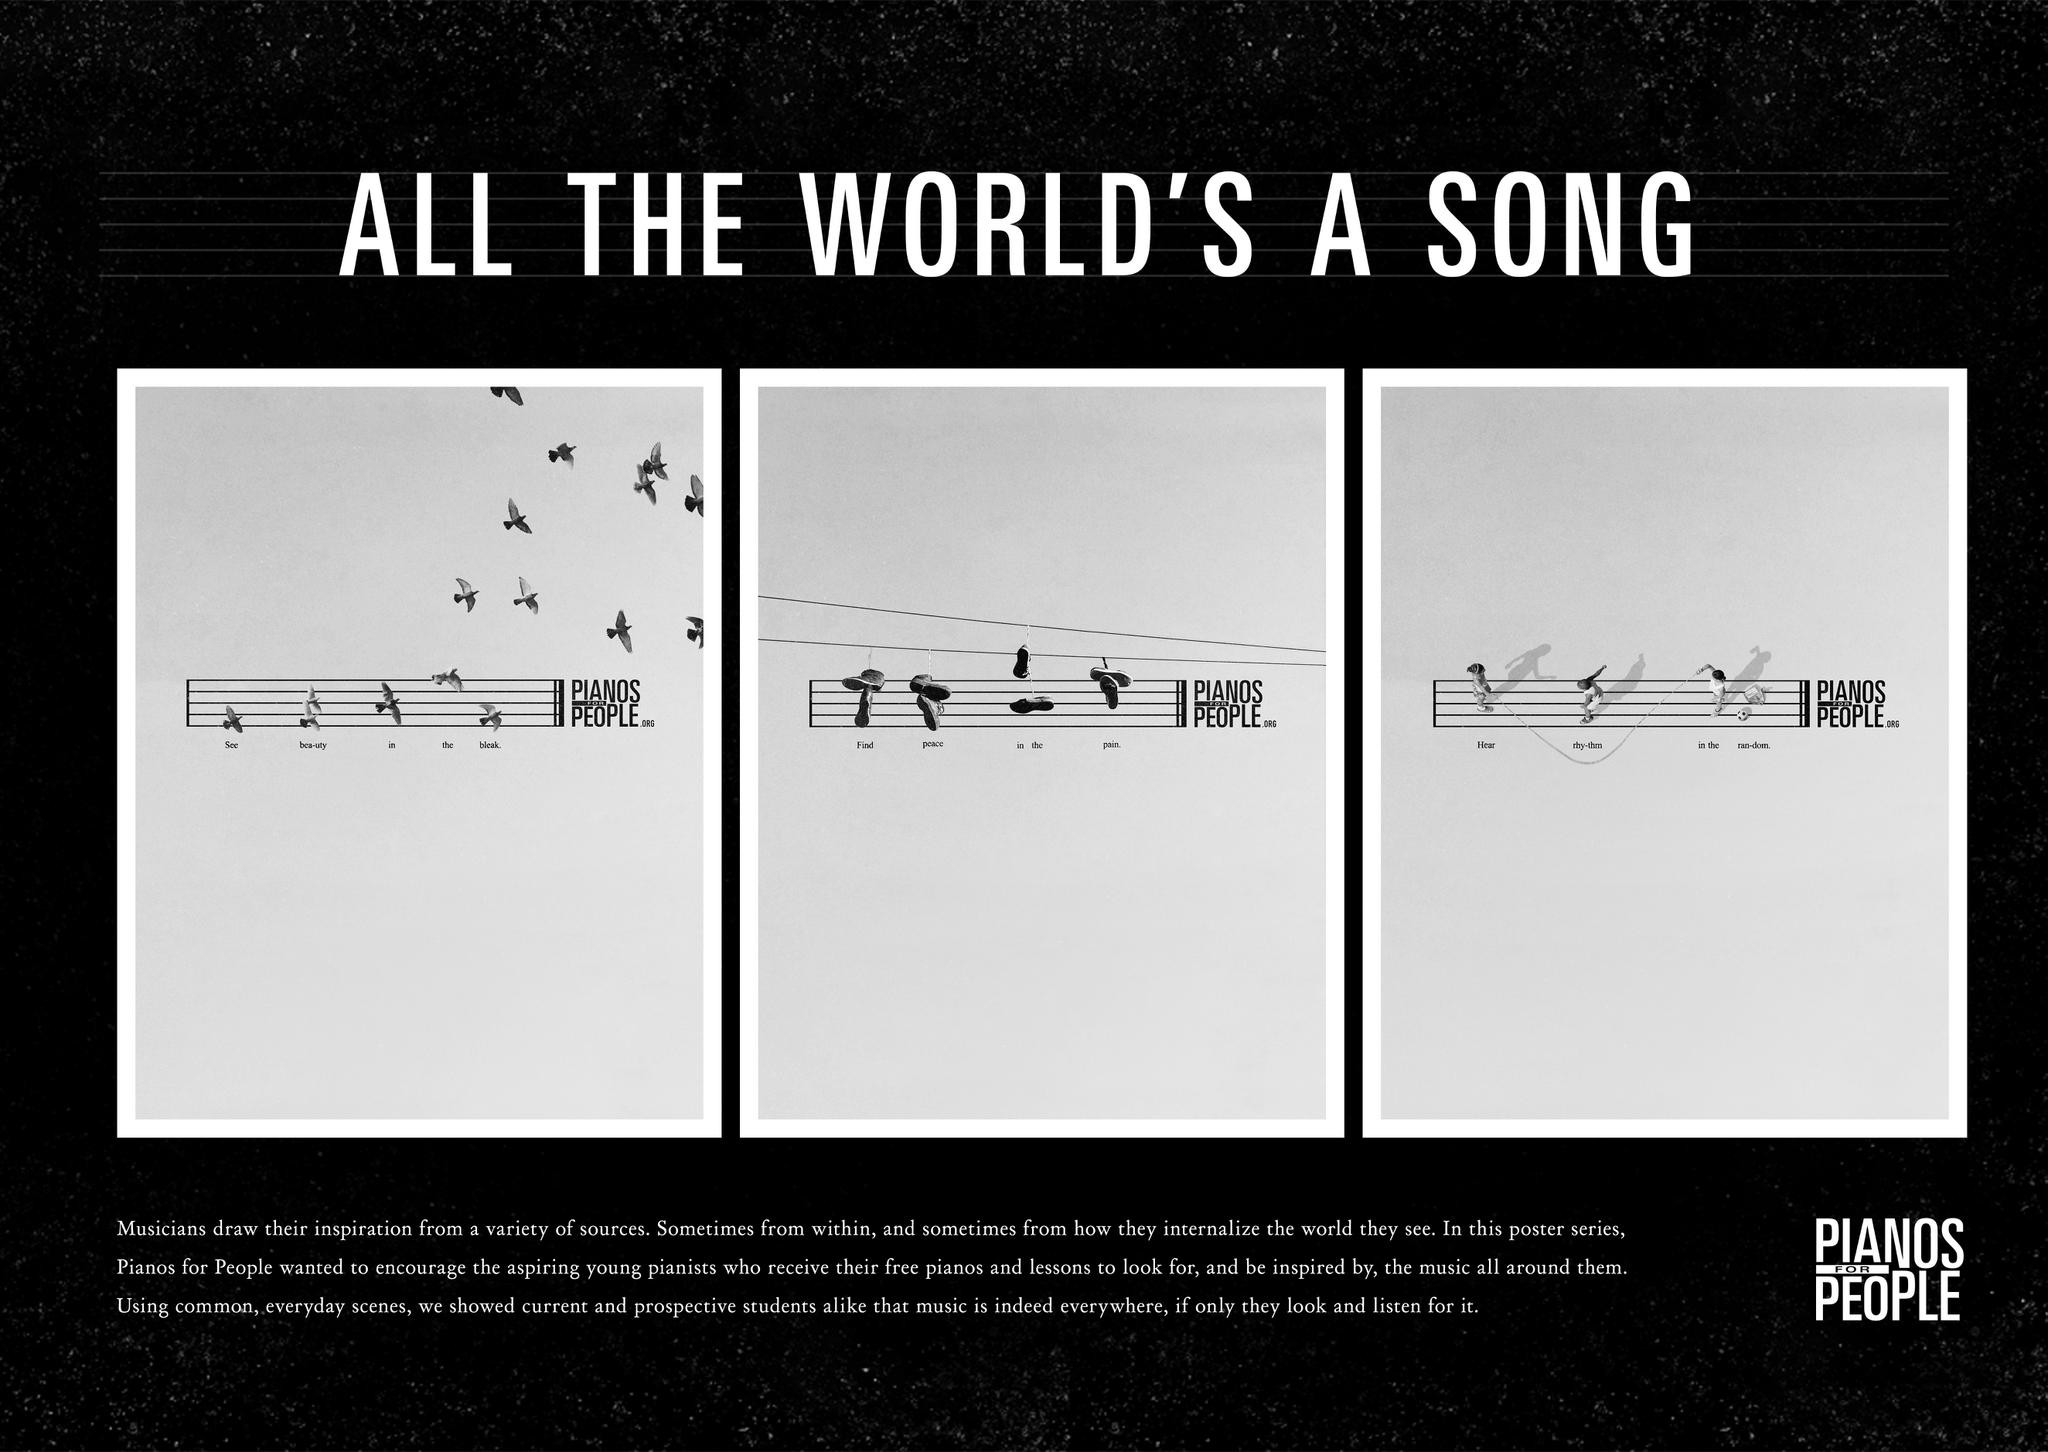 All the World's a Song